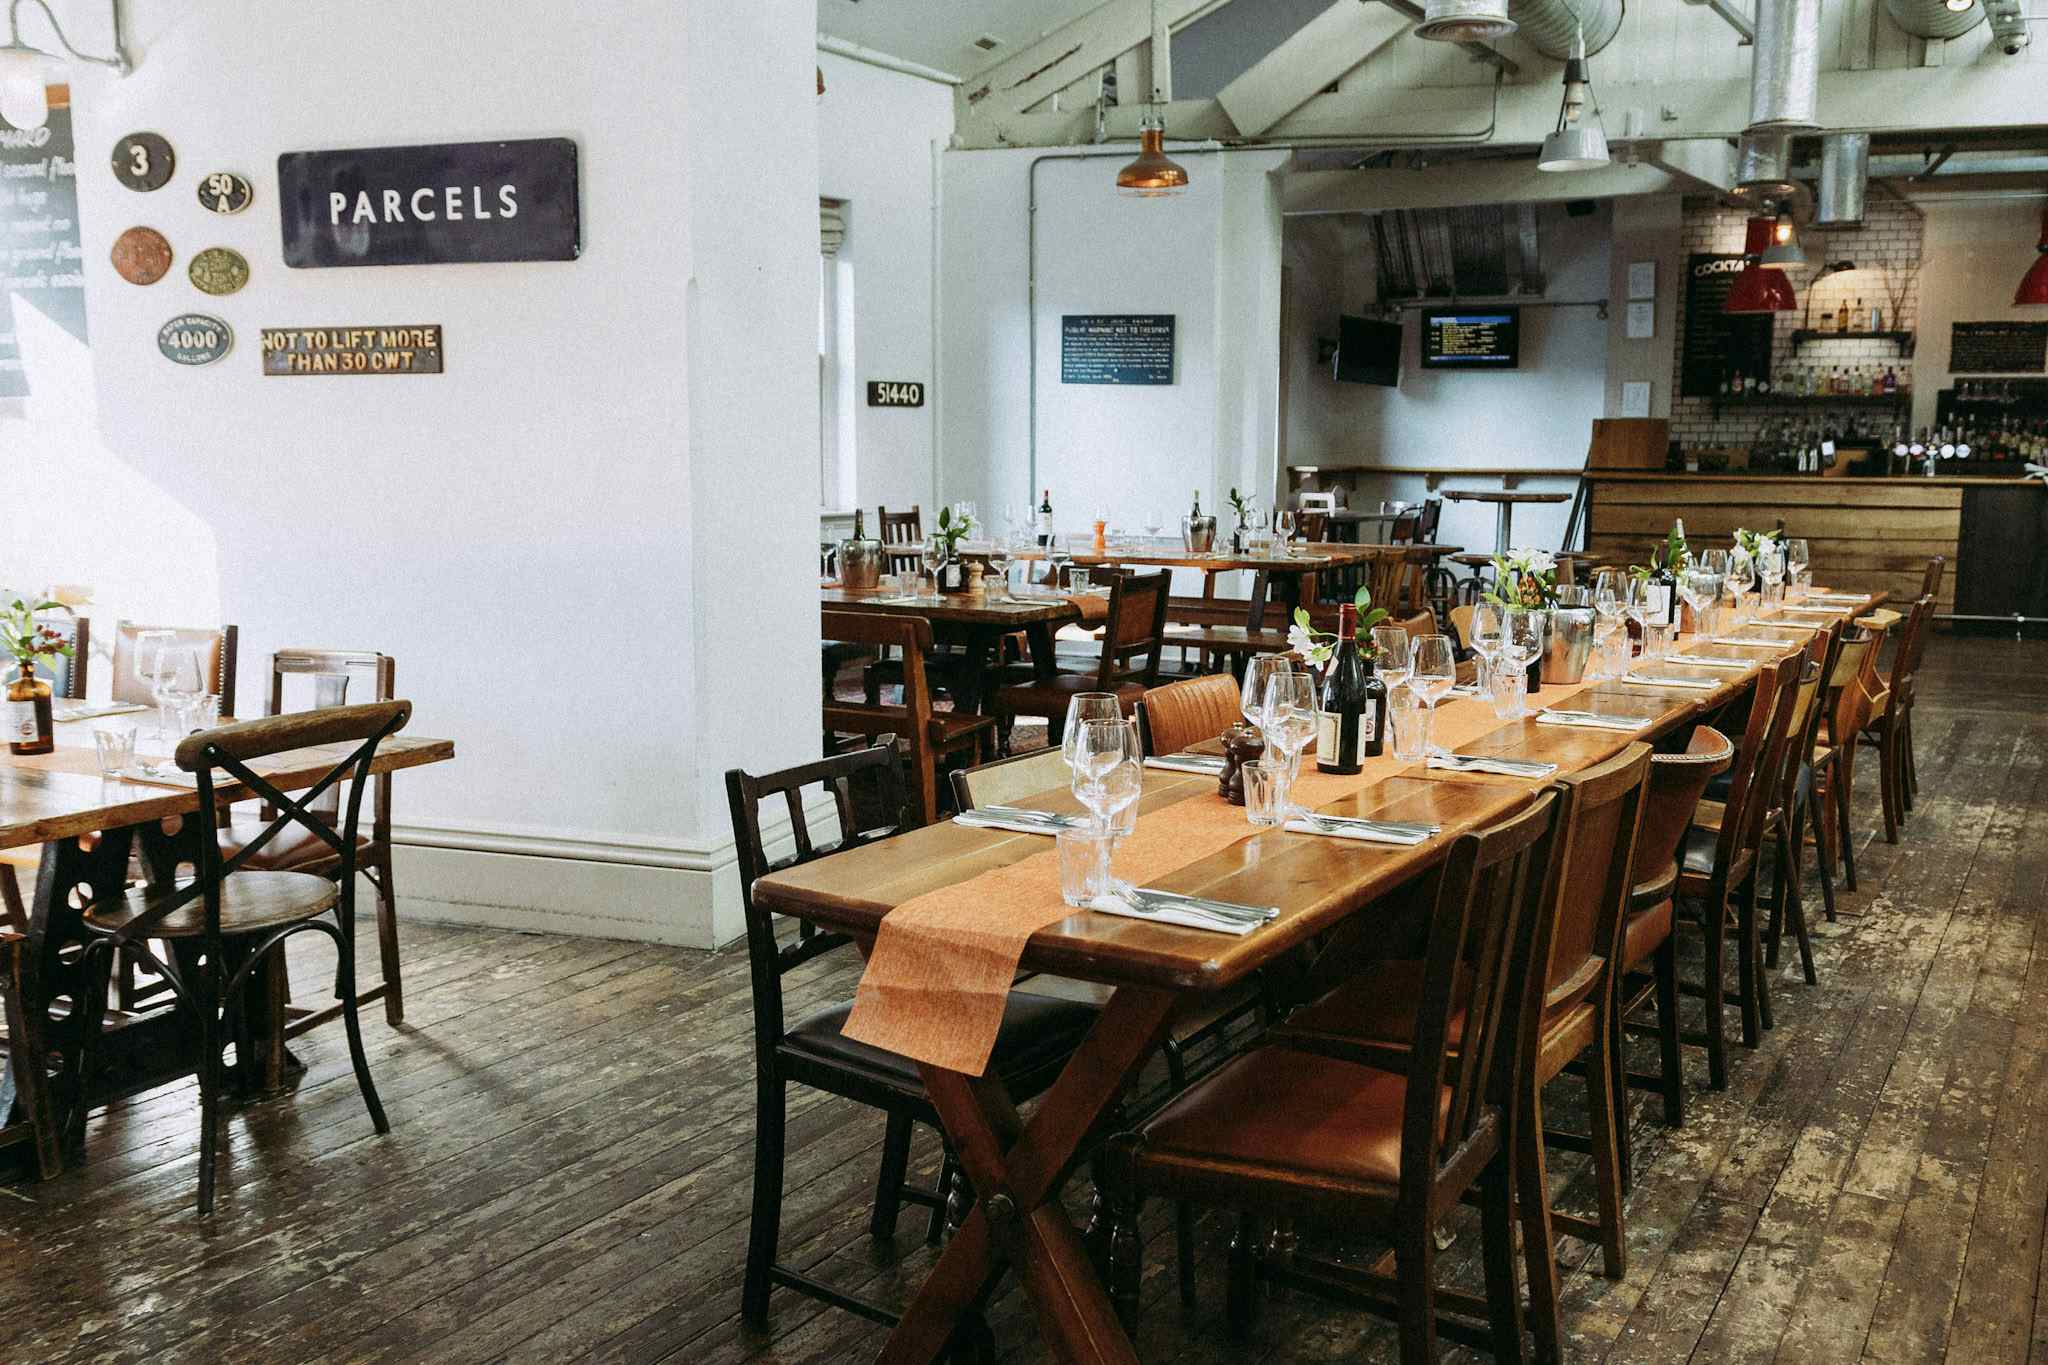 Private Dining at The Parcel Yard , The Parcel Yard, King's Cross